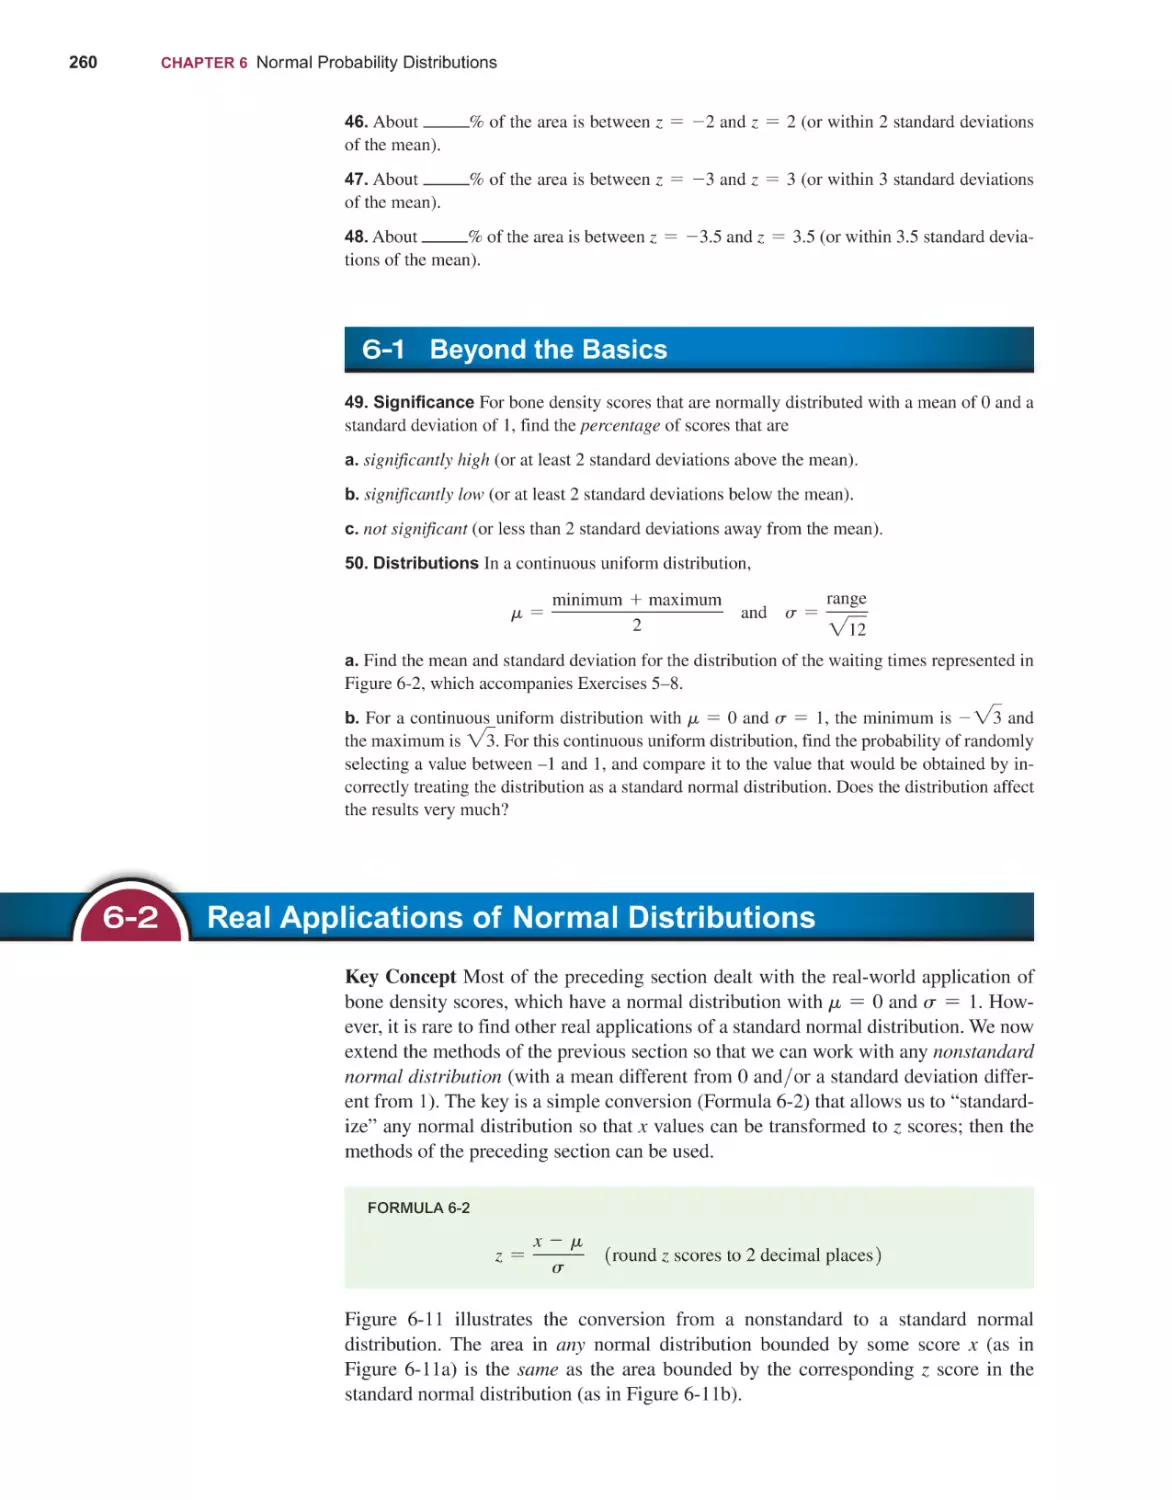 6‐2 Real Applications of Normal Distributions